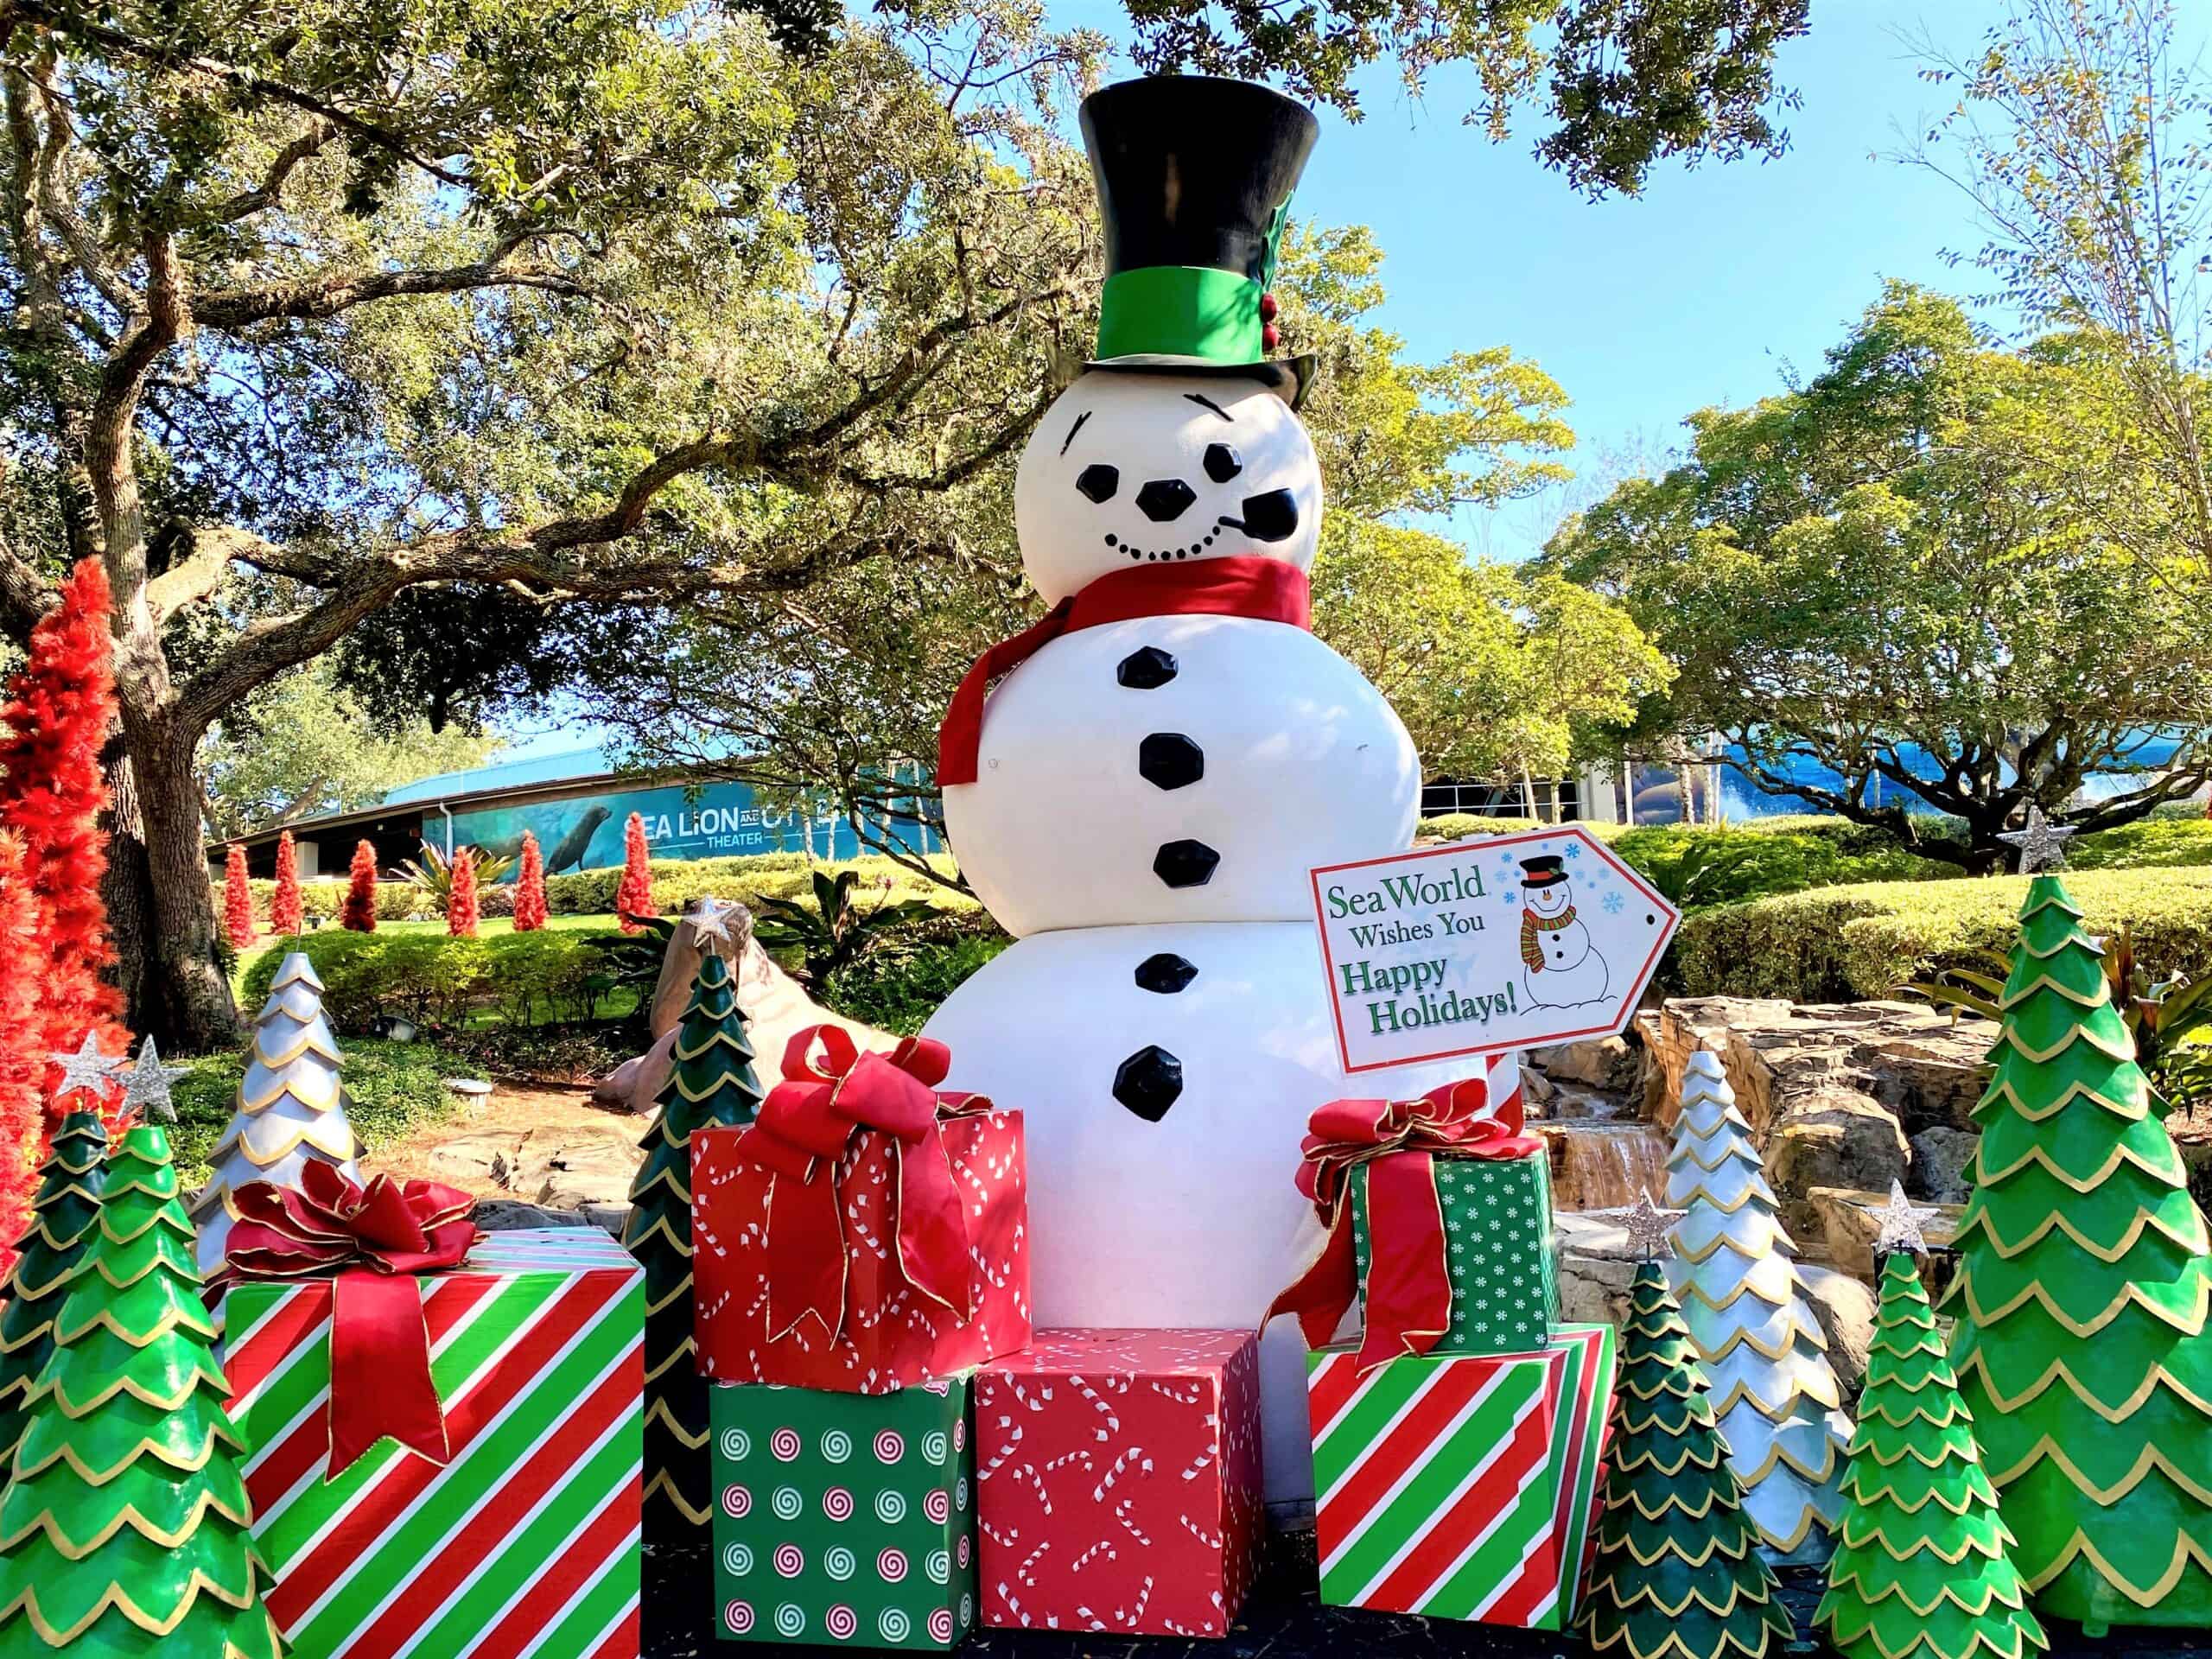 Photo opportunities during SeaWorld Orlando's Christmas Celebration include a large white snowman wearing a black top hat and surrounded by large Christmas present props in red and green wrapping paper, and red and green Christmas trees